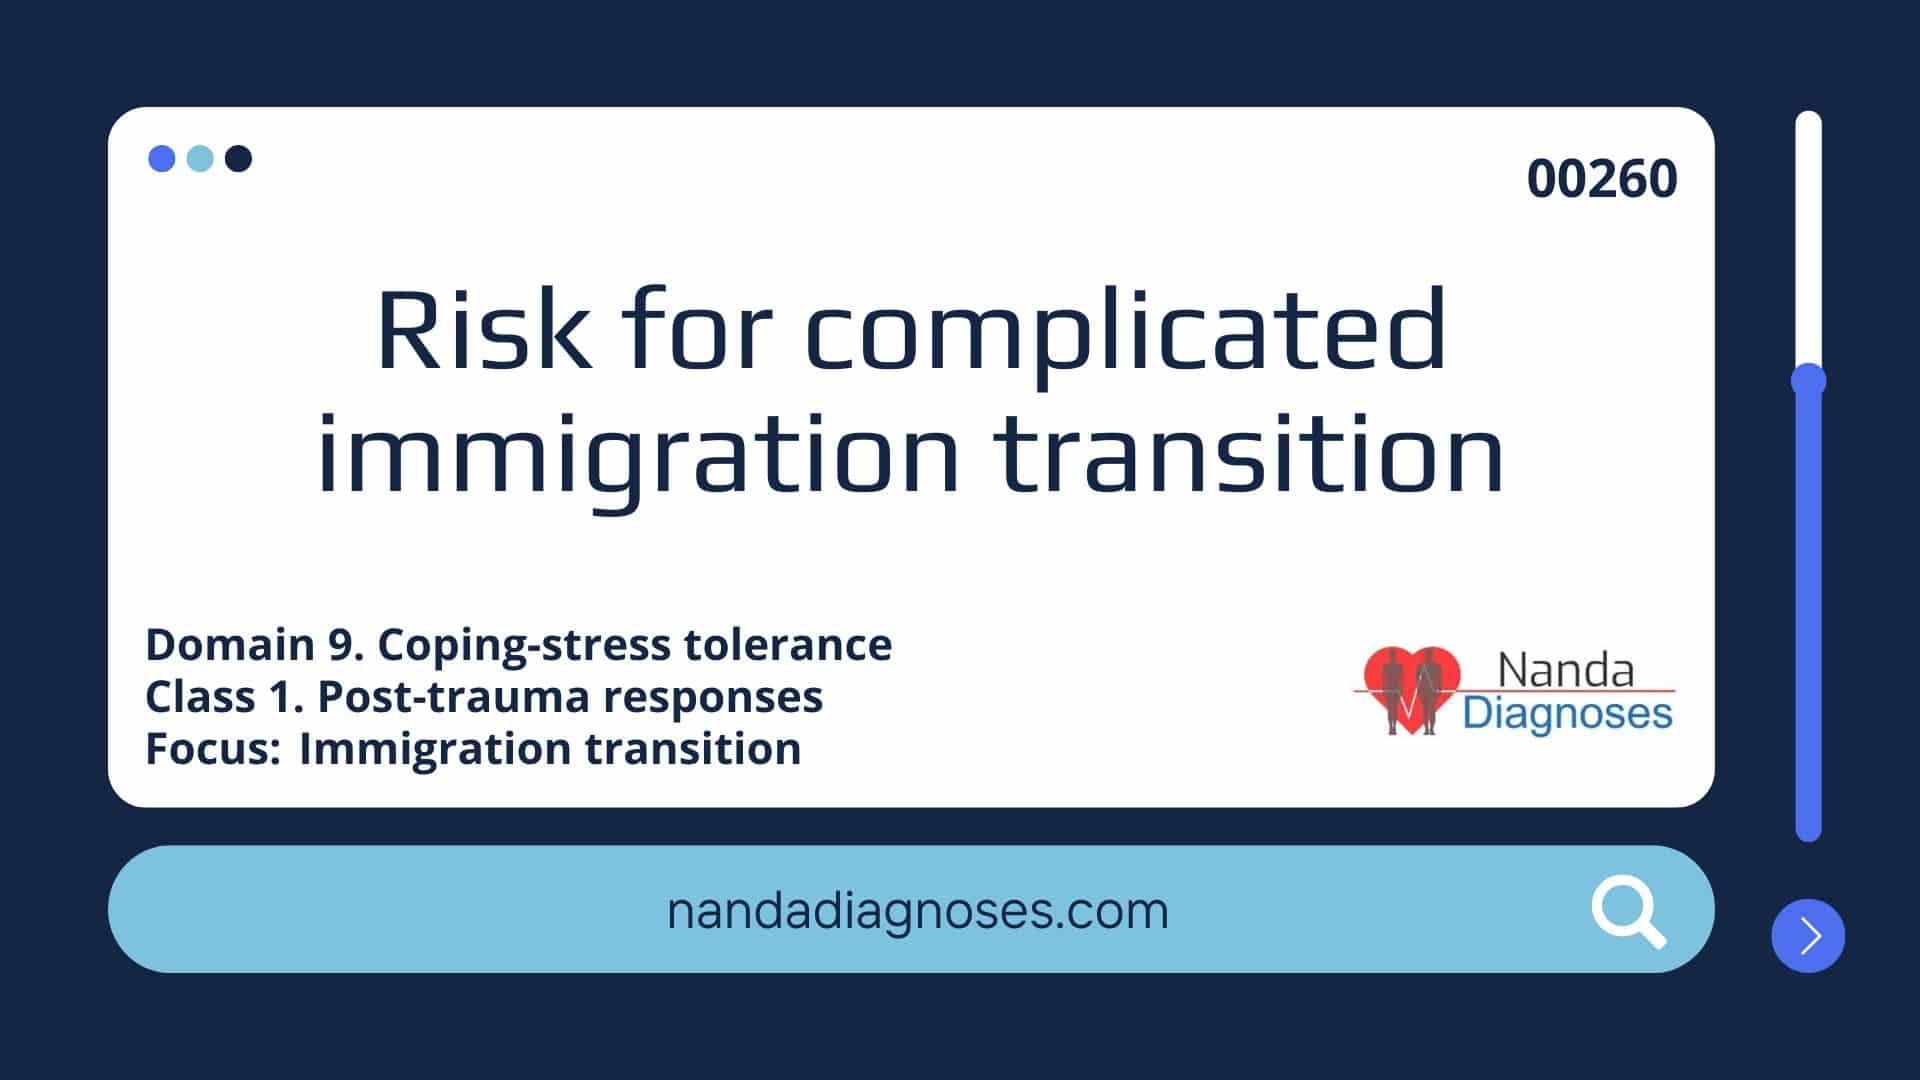 Nursing diagnosis Risk for complicated immigration transition